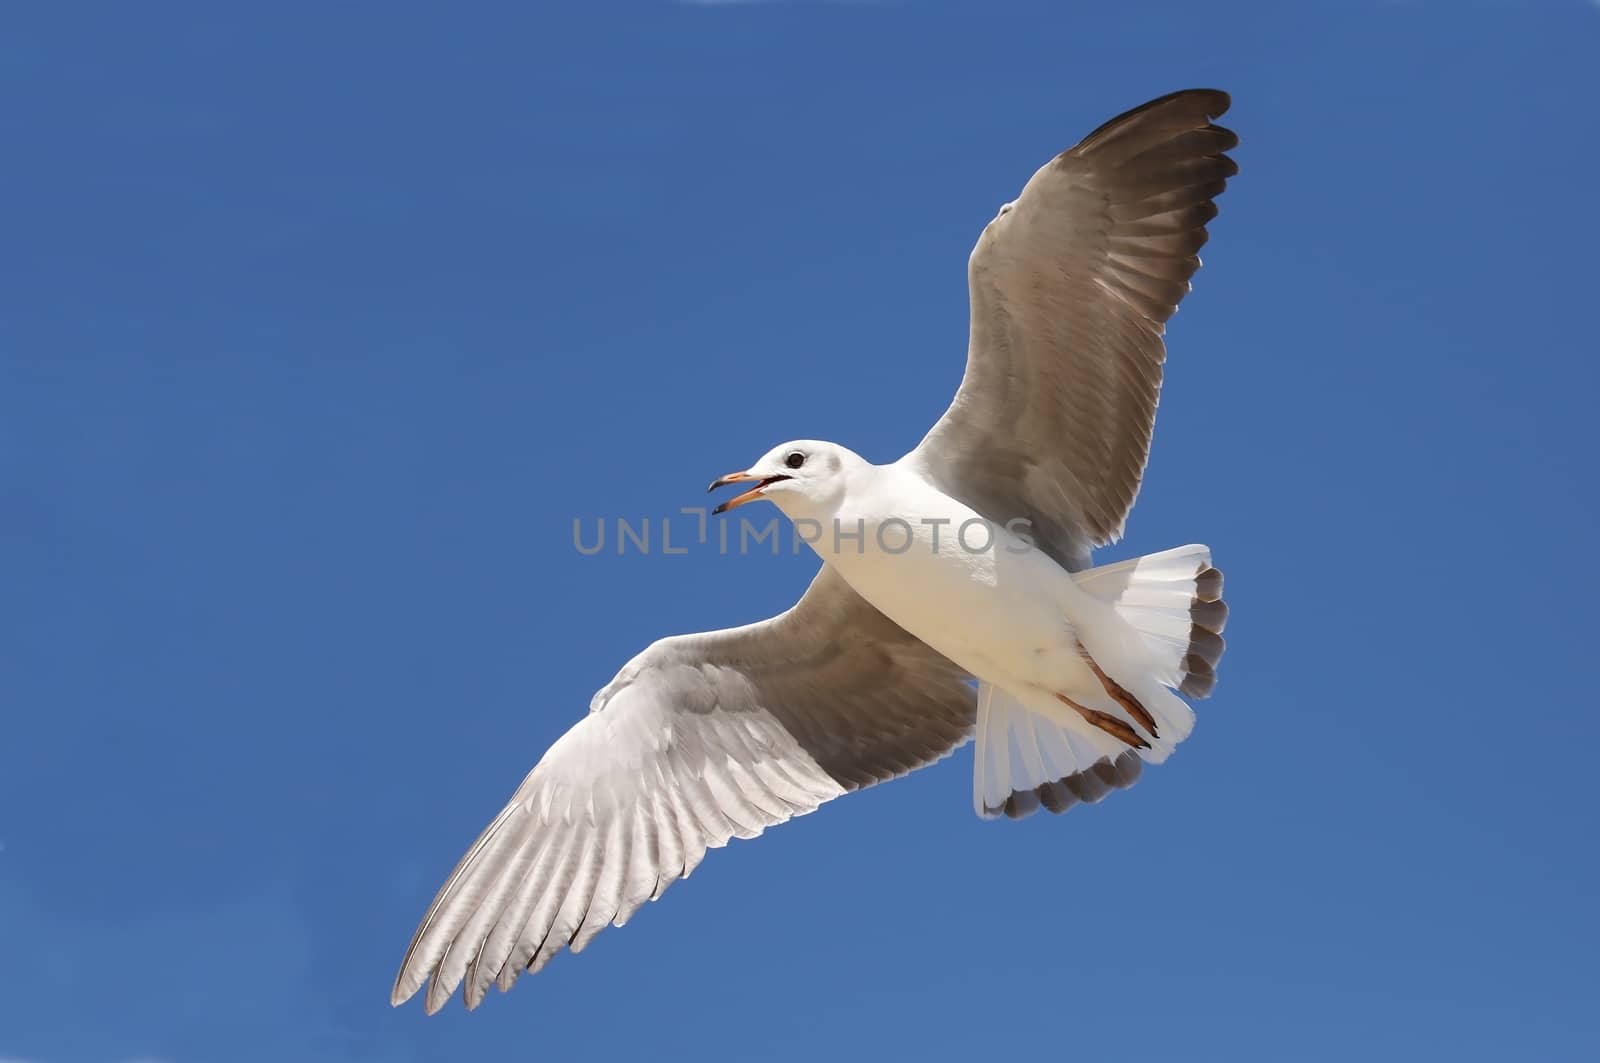 Graceful seagull bird soaring on a breeze and blue sky behind